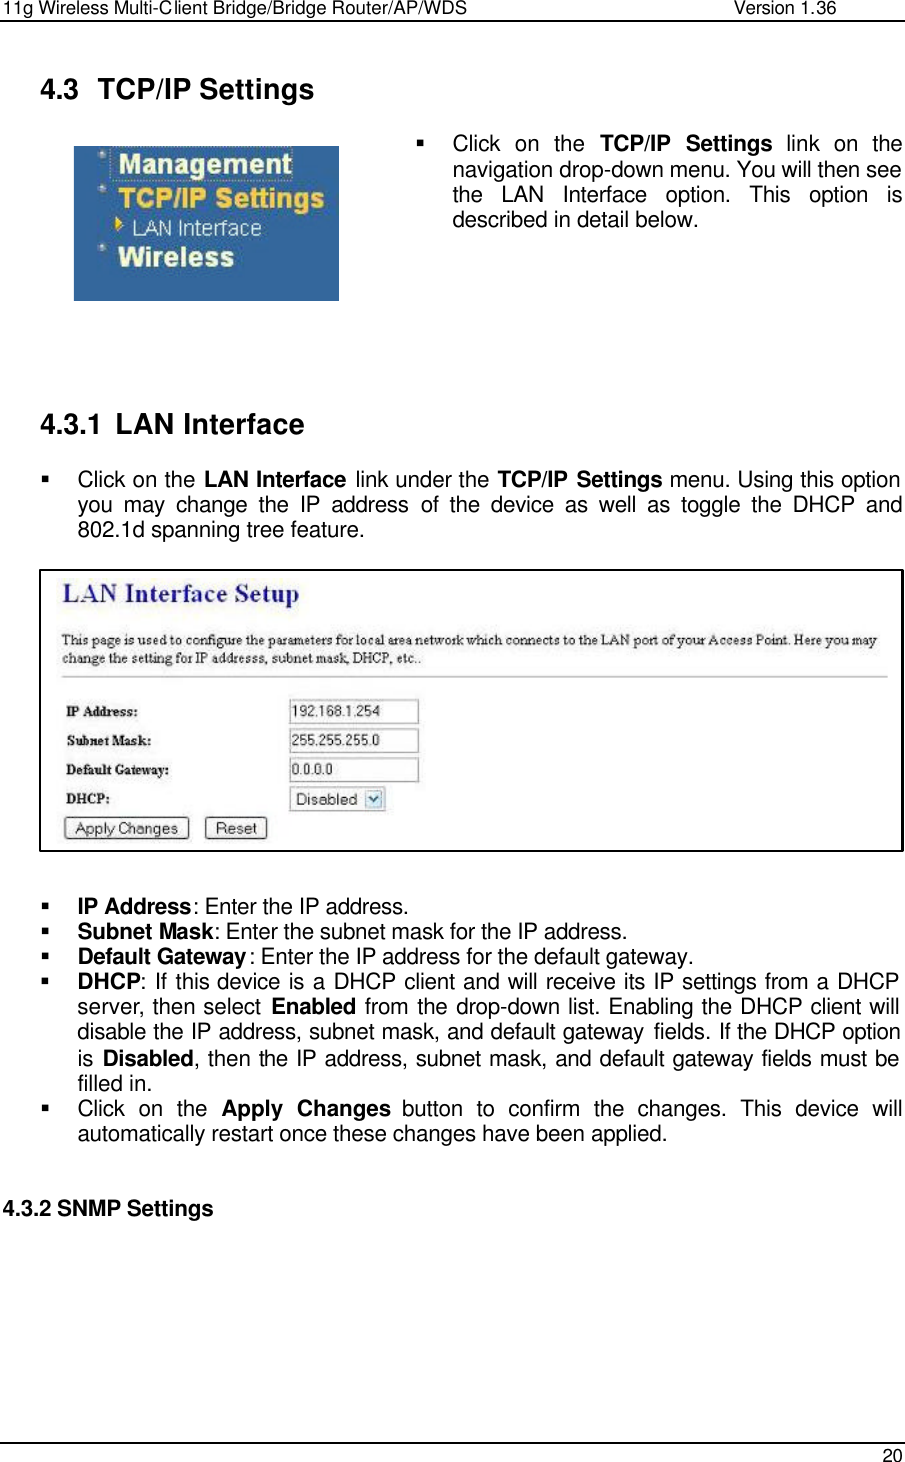 11g Wireless Multi-Client Bridge/Bridge Router/AP/WDS                                                   Version 1.36    20   4.3 TCP/IP Settings § Click on the TCP/IP Settings link on the navigation drop-down menu. You will then see the LAN Interface option. This option is described in detail below.          4.3.1 LAN Interface § Click on the LAN Interface link under the TCP/IP Settings menu. Using this option you may change the IP address of the device as well as toggle the DHCP and 802.1d spanning tree feature.               § IP Address: Enter the IP address. § Subnet Mask: Enter the subnet mask for the IP address. § Default Gateway: Enter the IP address for the default gateway. § DHCP: If this device is a DHCP client and will receive its IP settings from a DHCP server, then select Enabled from the drop-down list. Enabling the DHCP client will disable the IP address, subnet mask, and default gateway fields. If the DHCP option is Disabled, then the IP address, subnet mask, and default gateway fields must be filled in.    § Click on the Apply Changes button to confirm the changes. This device will automatically restart once these changes have been applied.    4.3.2 SNMP Settings   